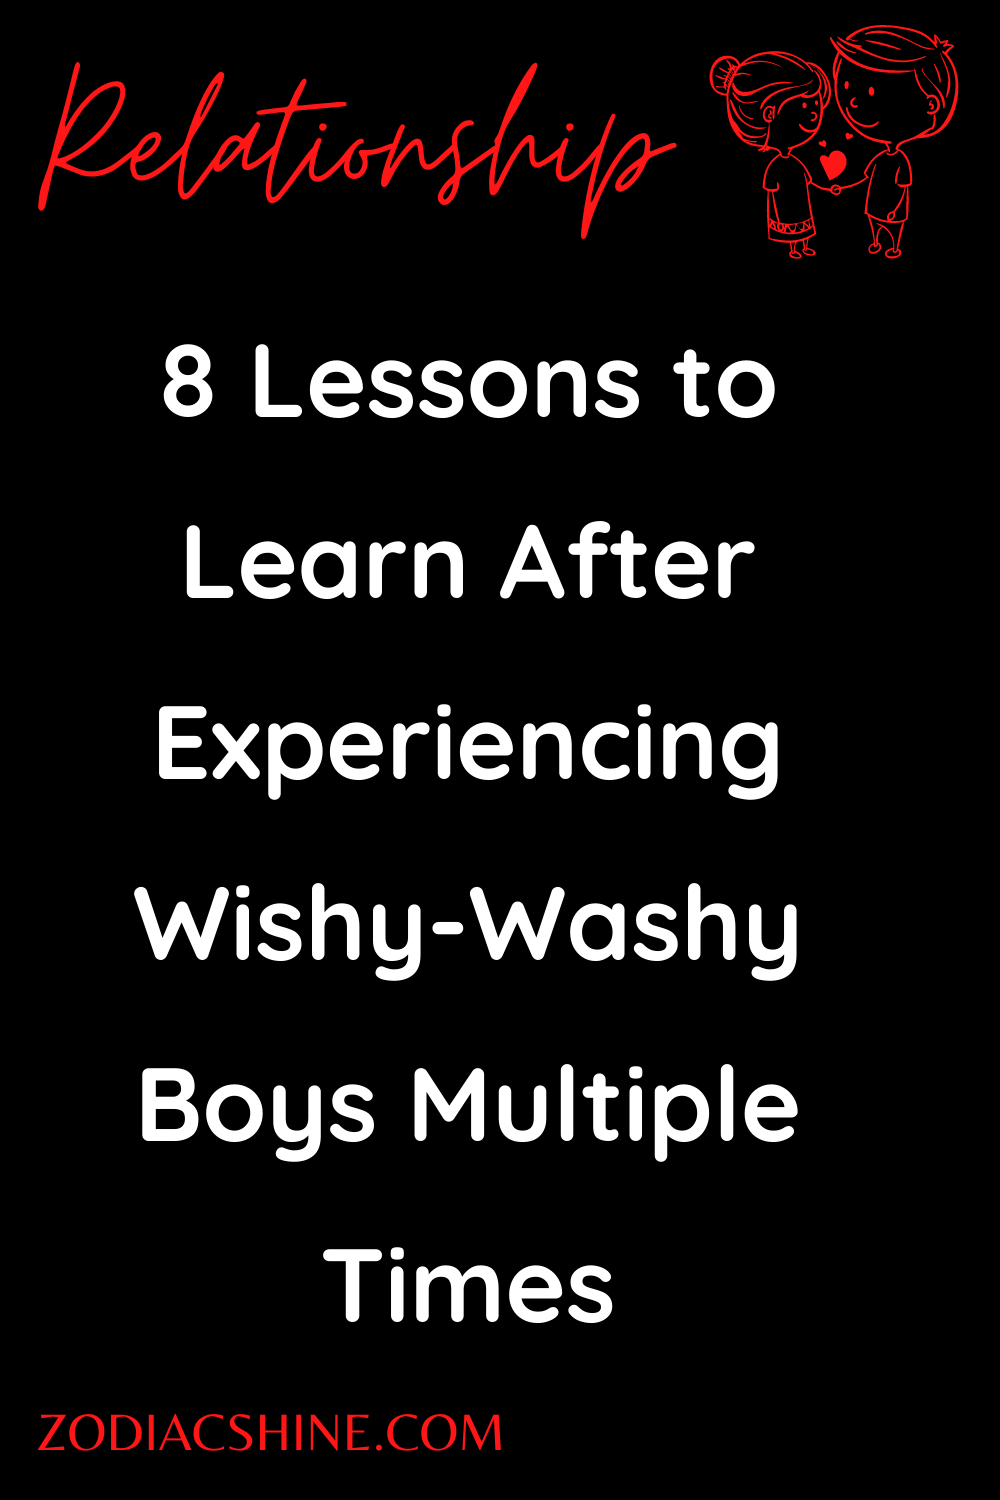 8 Lessons to Learn After Experiencing Wishy-Washy Boys Multiple Times